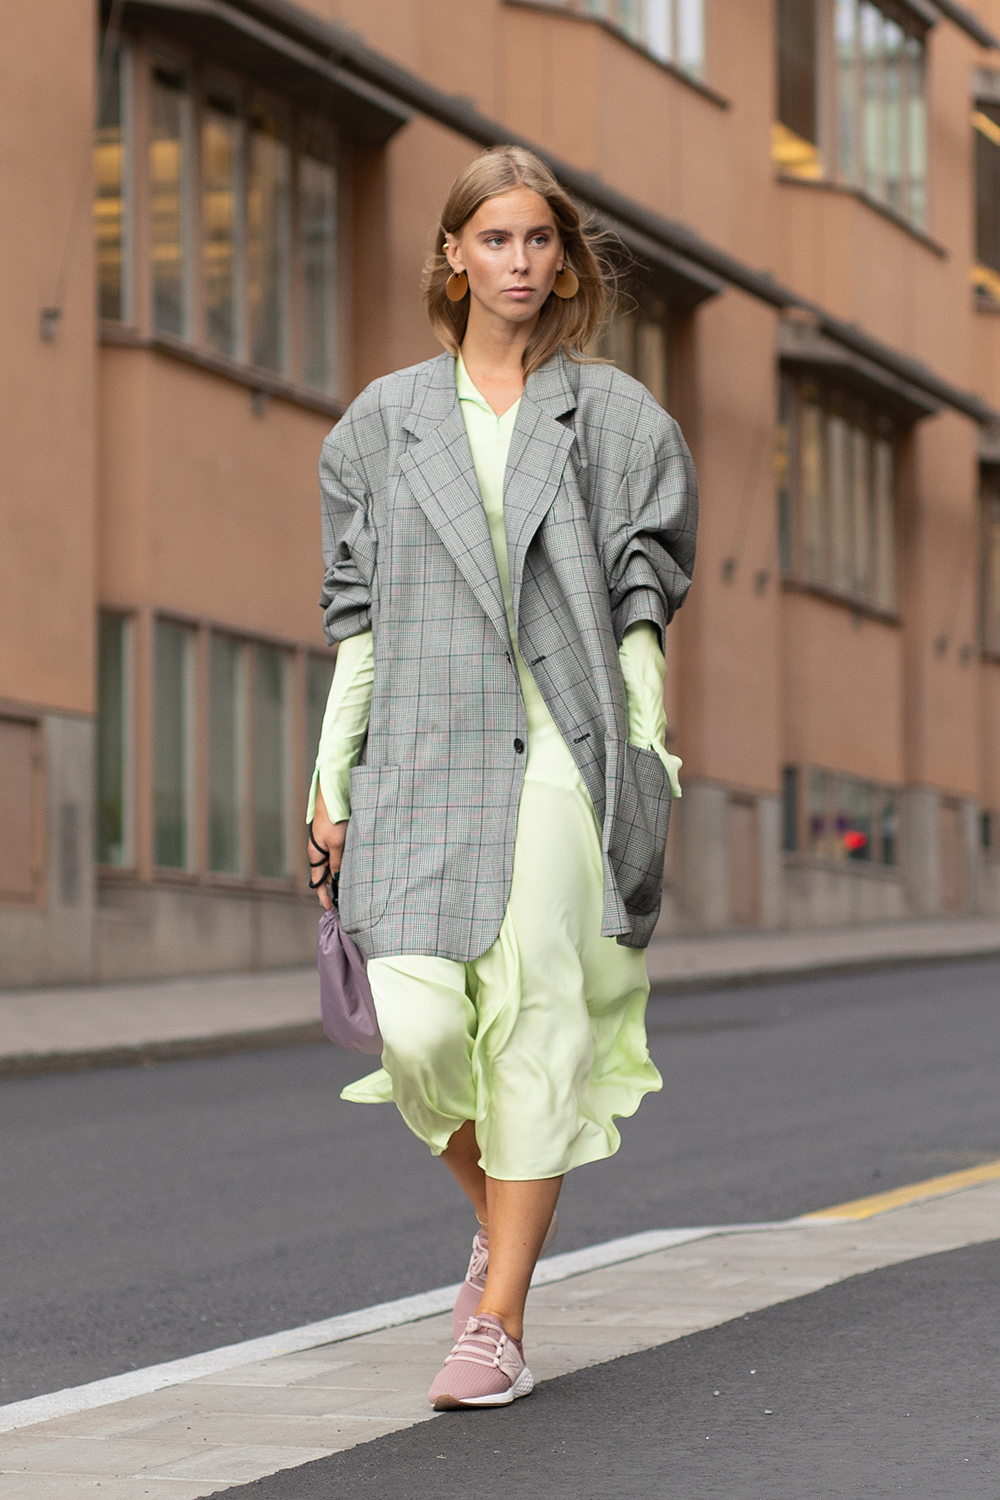 STOCKHOLM, SWEDEN - AUGUST 30: A guest is seen on the street during Fashion Week Stockholm SS19 wearing grey coat with neon green dress and nude pink New Balance sneakers on August 30, 2018 in Stockholm, Sweden. (Photo by Matthew Sperzel/Getty Images)